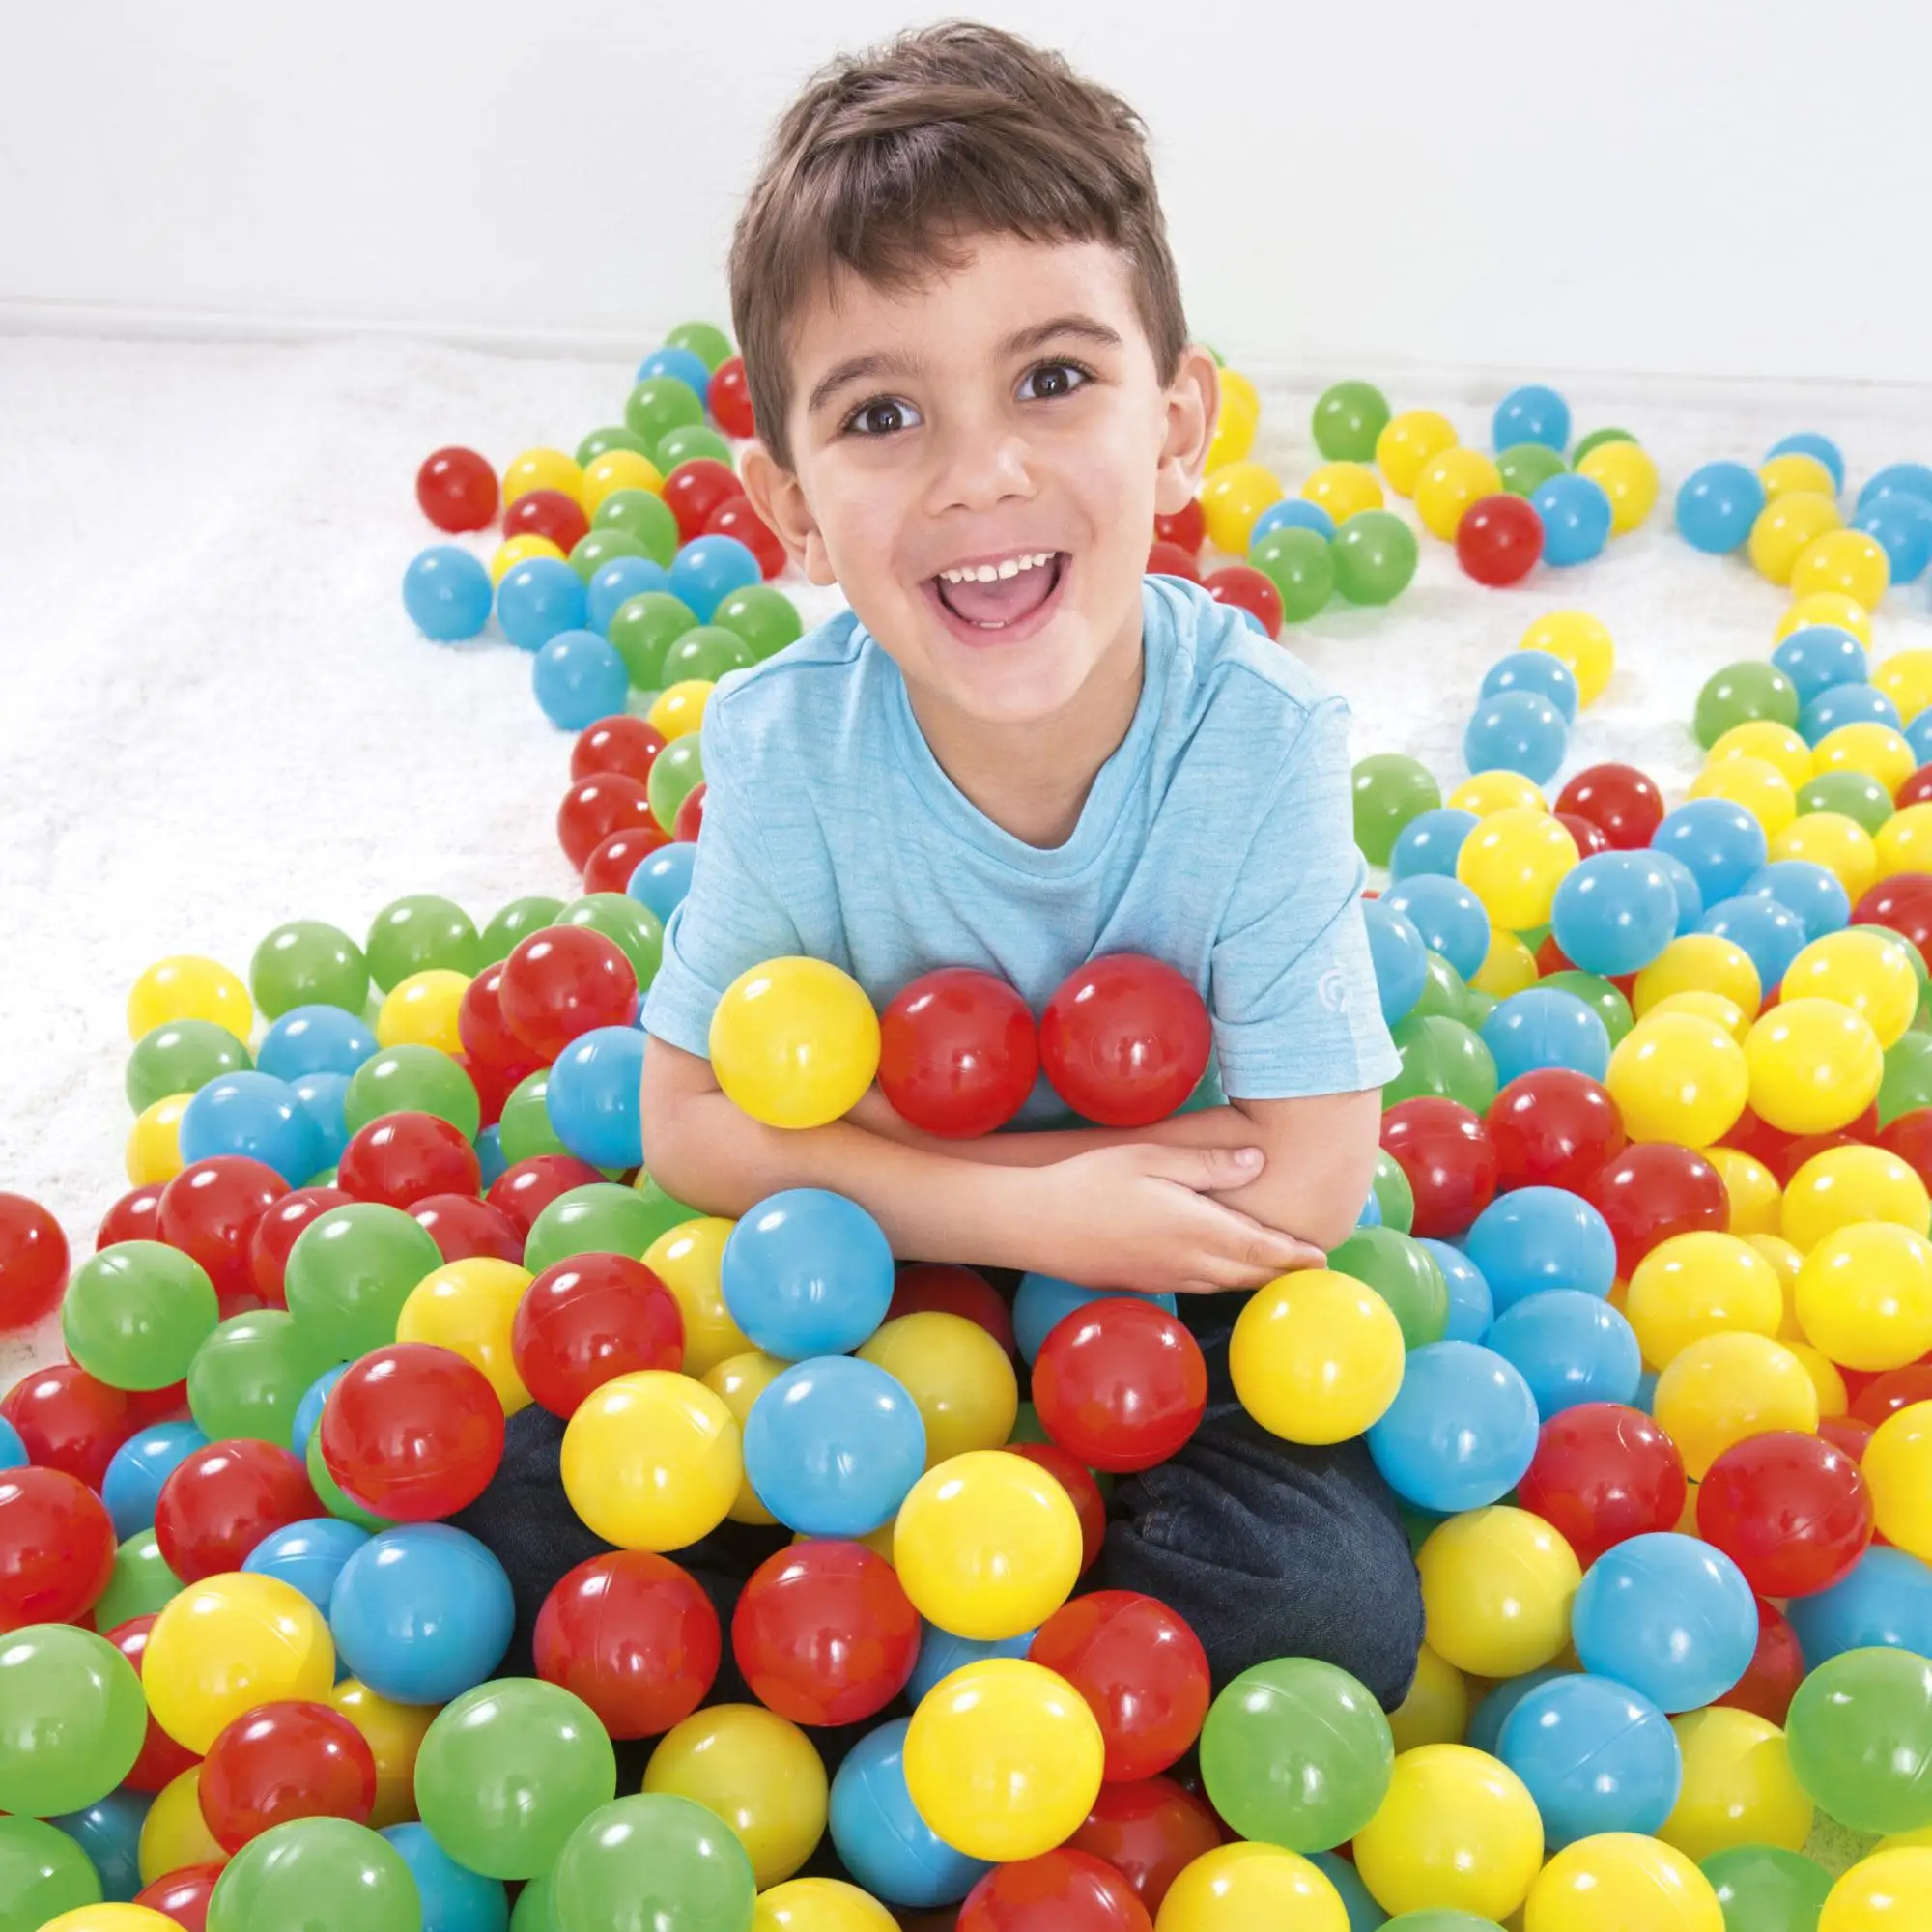 Bestway Fisher-Price Small Plastic Multi-Color Play Pit Balls, 100 Count - image 5 of 9